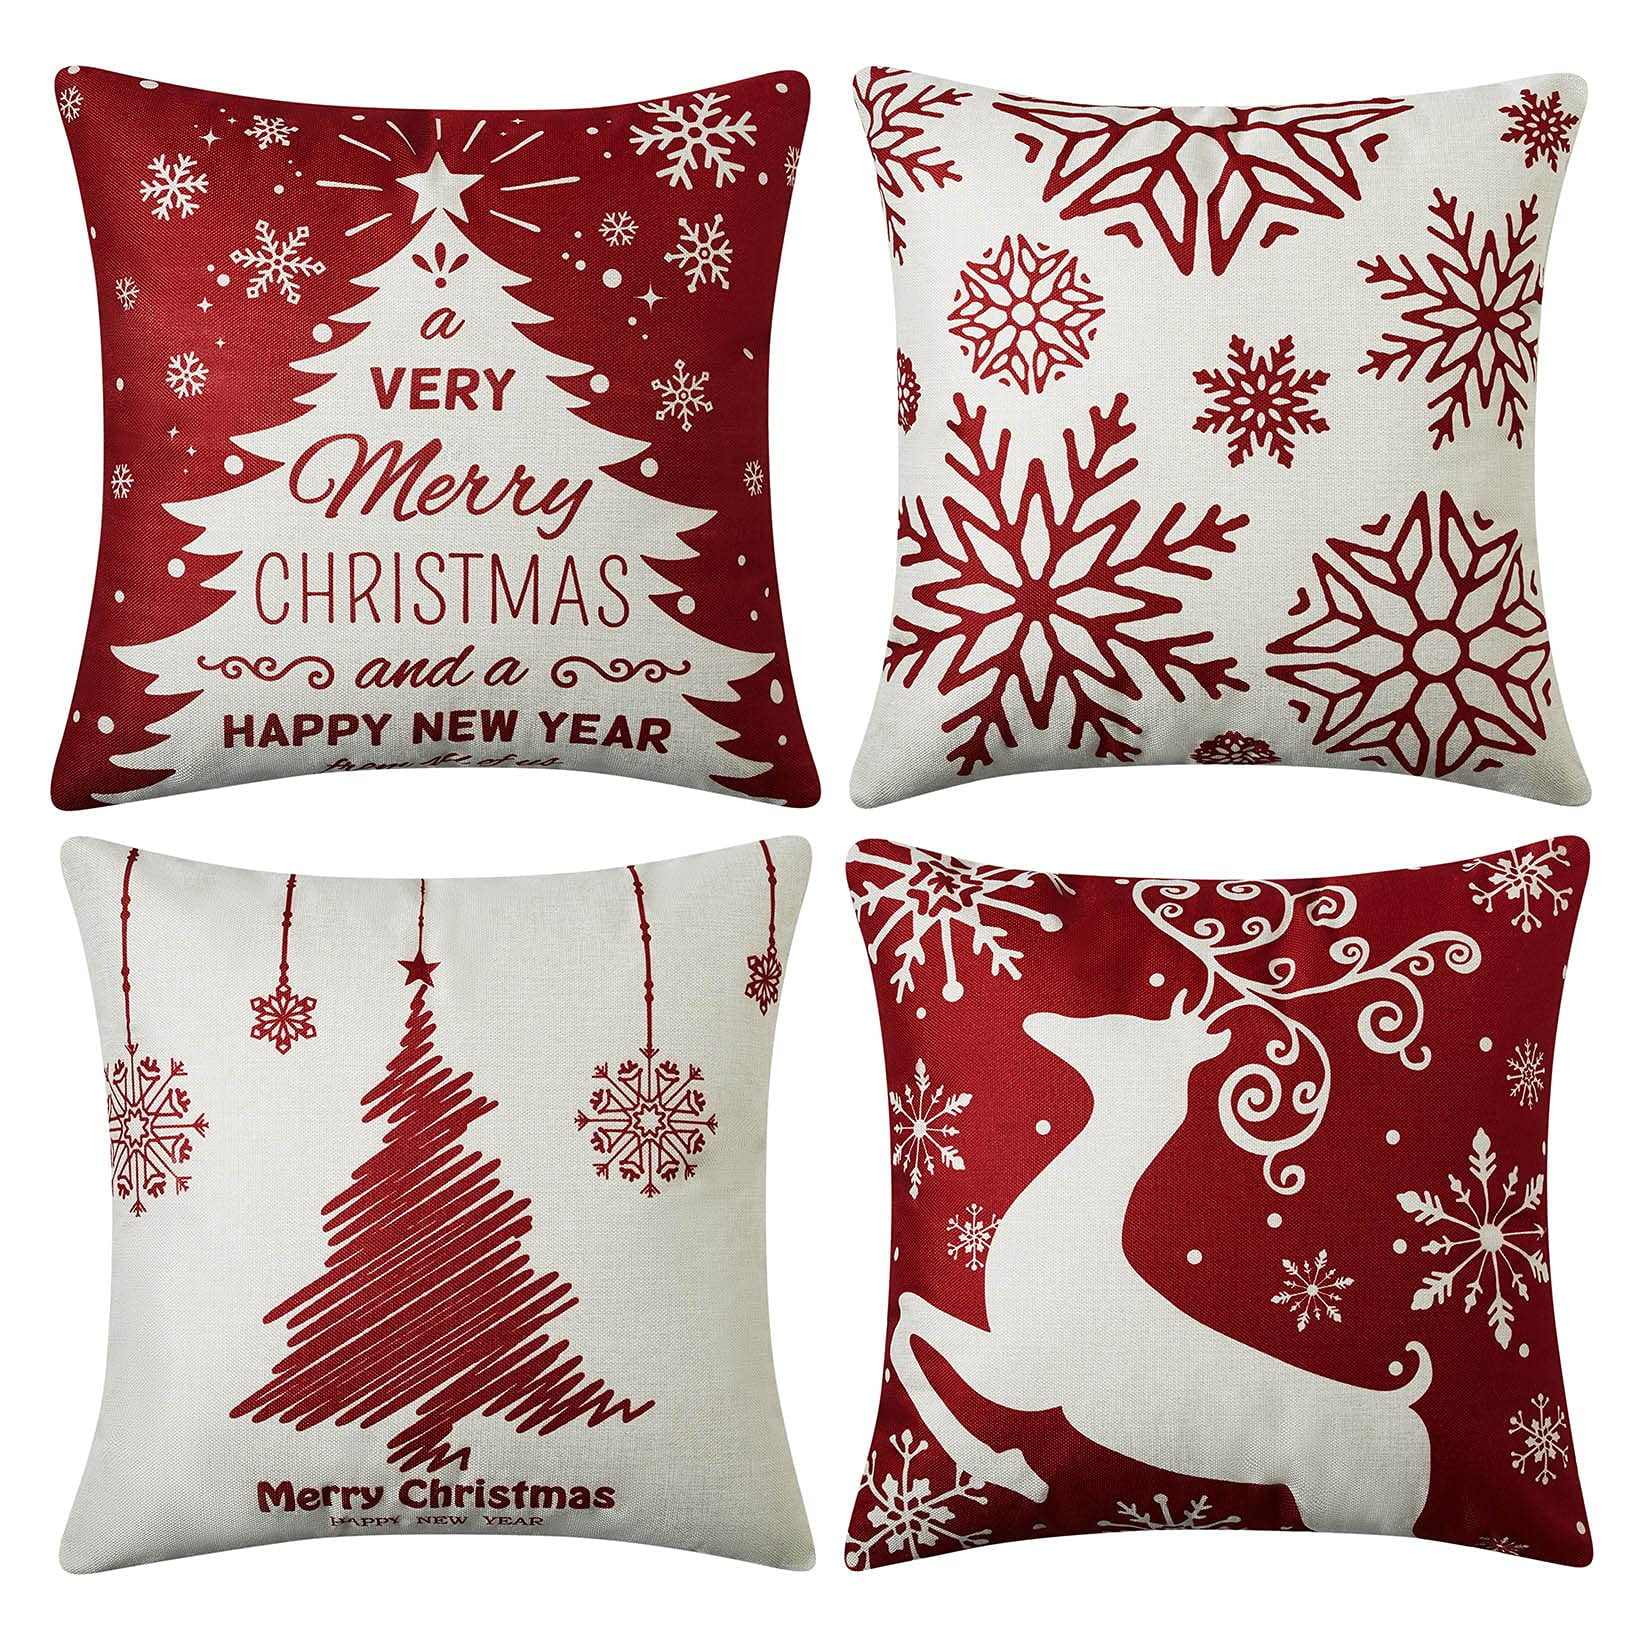 The Holiday Aisle® Christmas Pillow Covers 12X20 Set Of 4 For